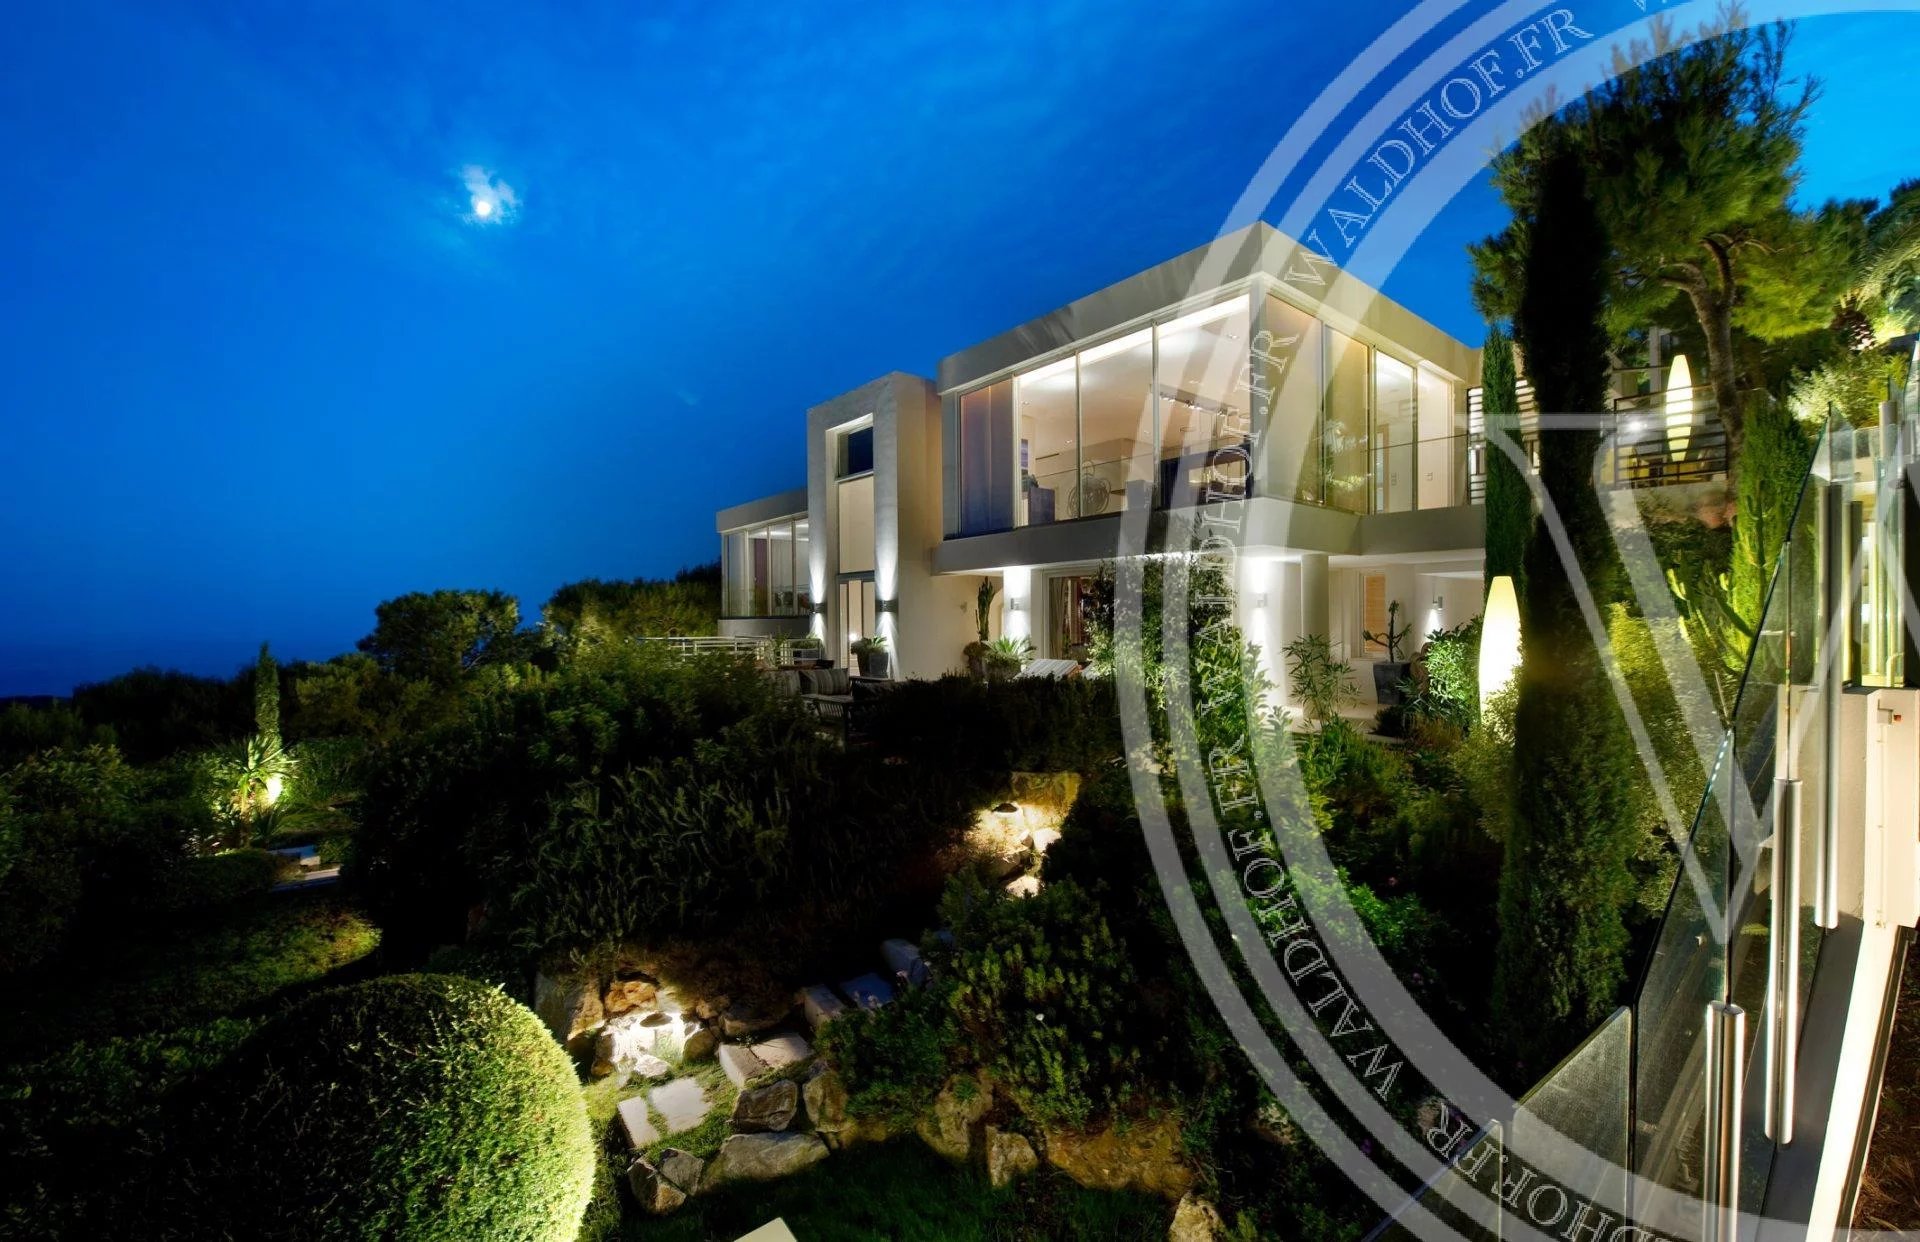 One of the finest estates on the French Riviera